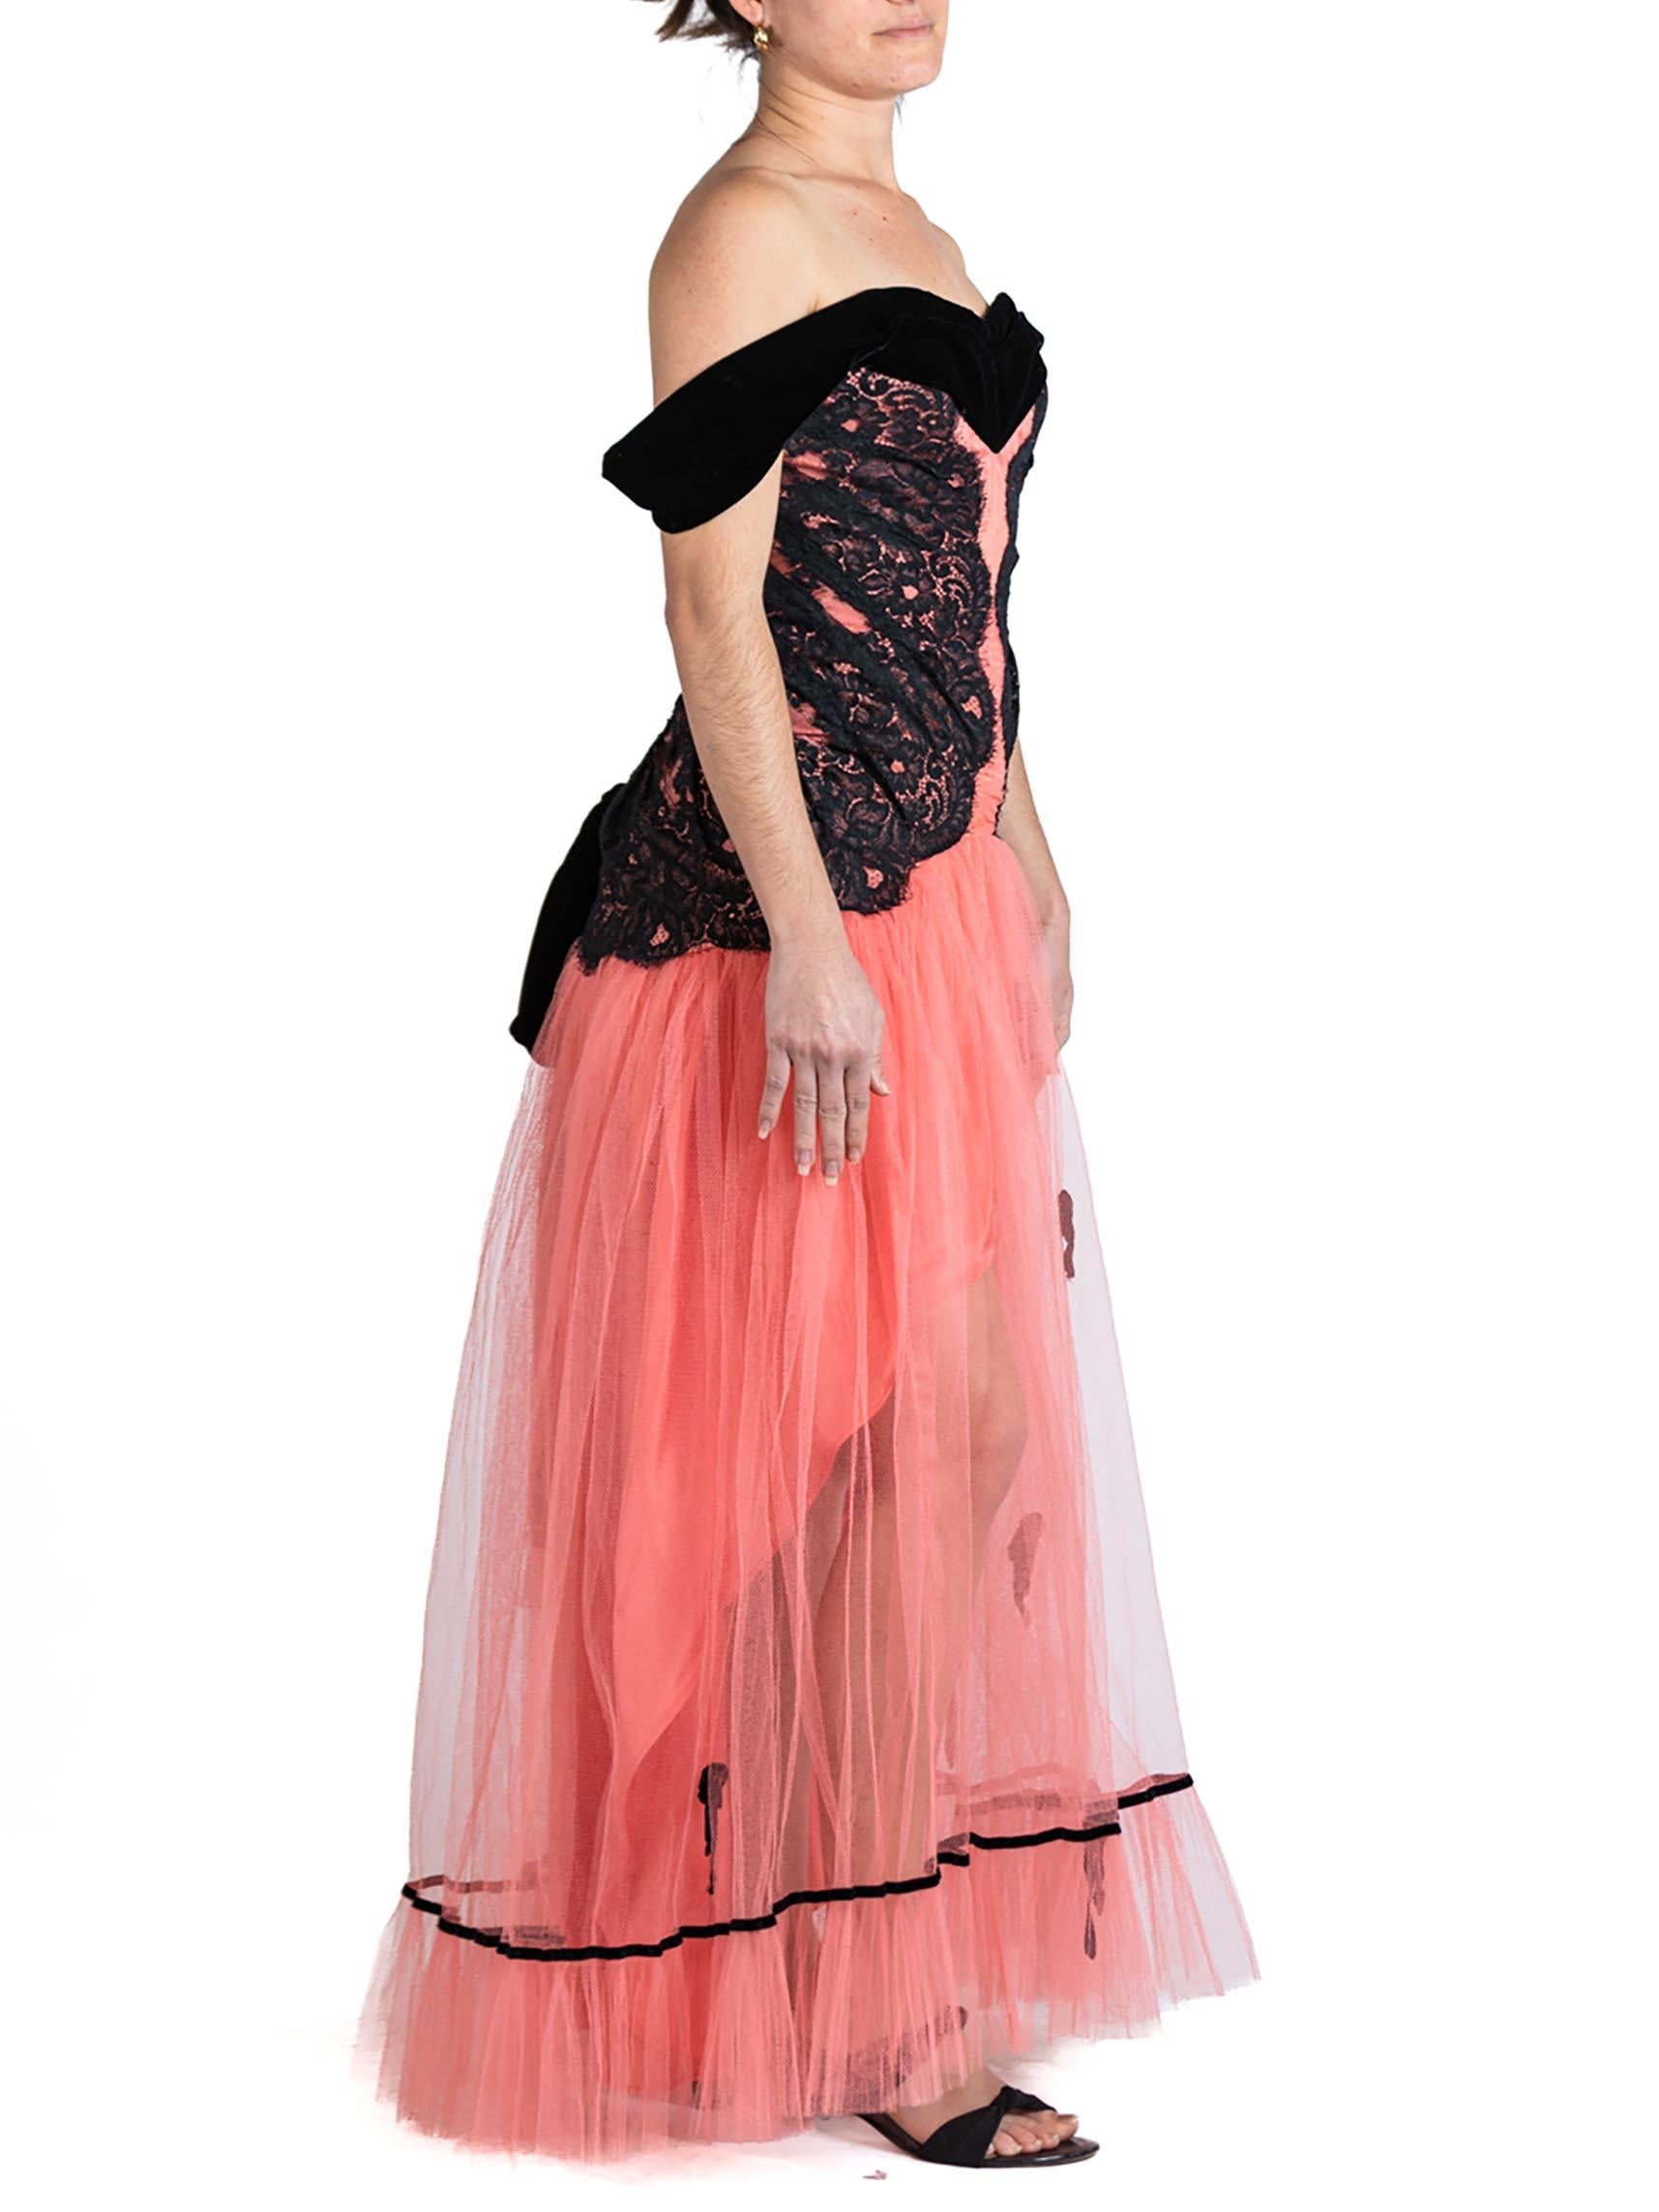 MORPHEW ATELIER Salmon Pink & Black Rayon Blend Tulle Lace Gown With Velvet Bow For Sale 3